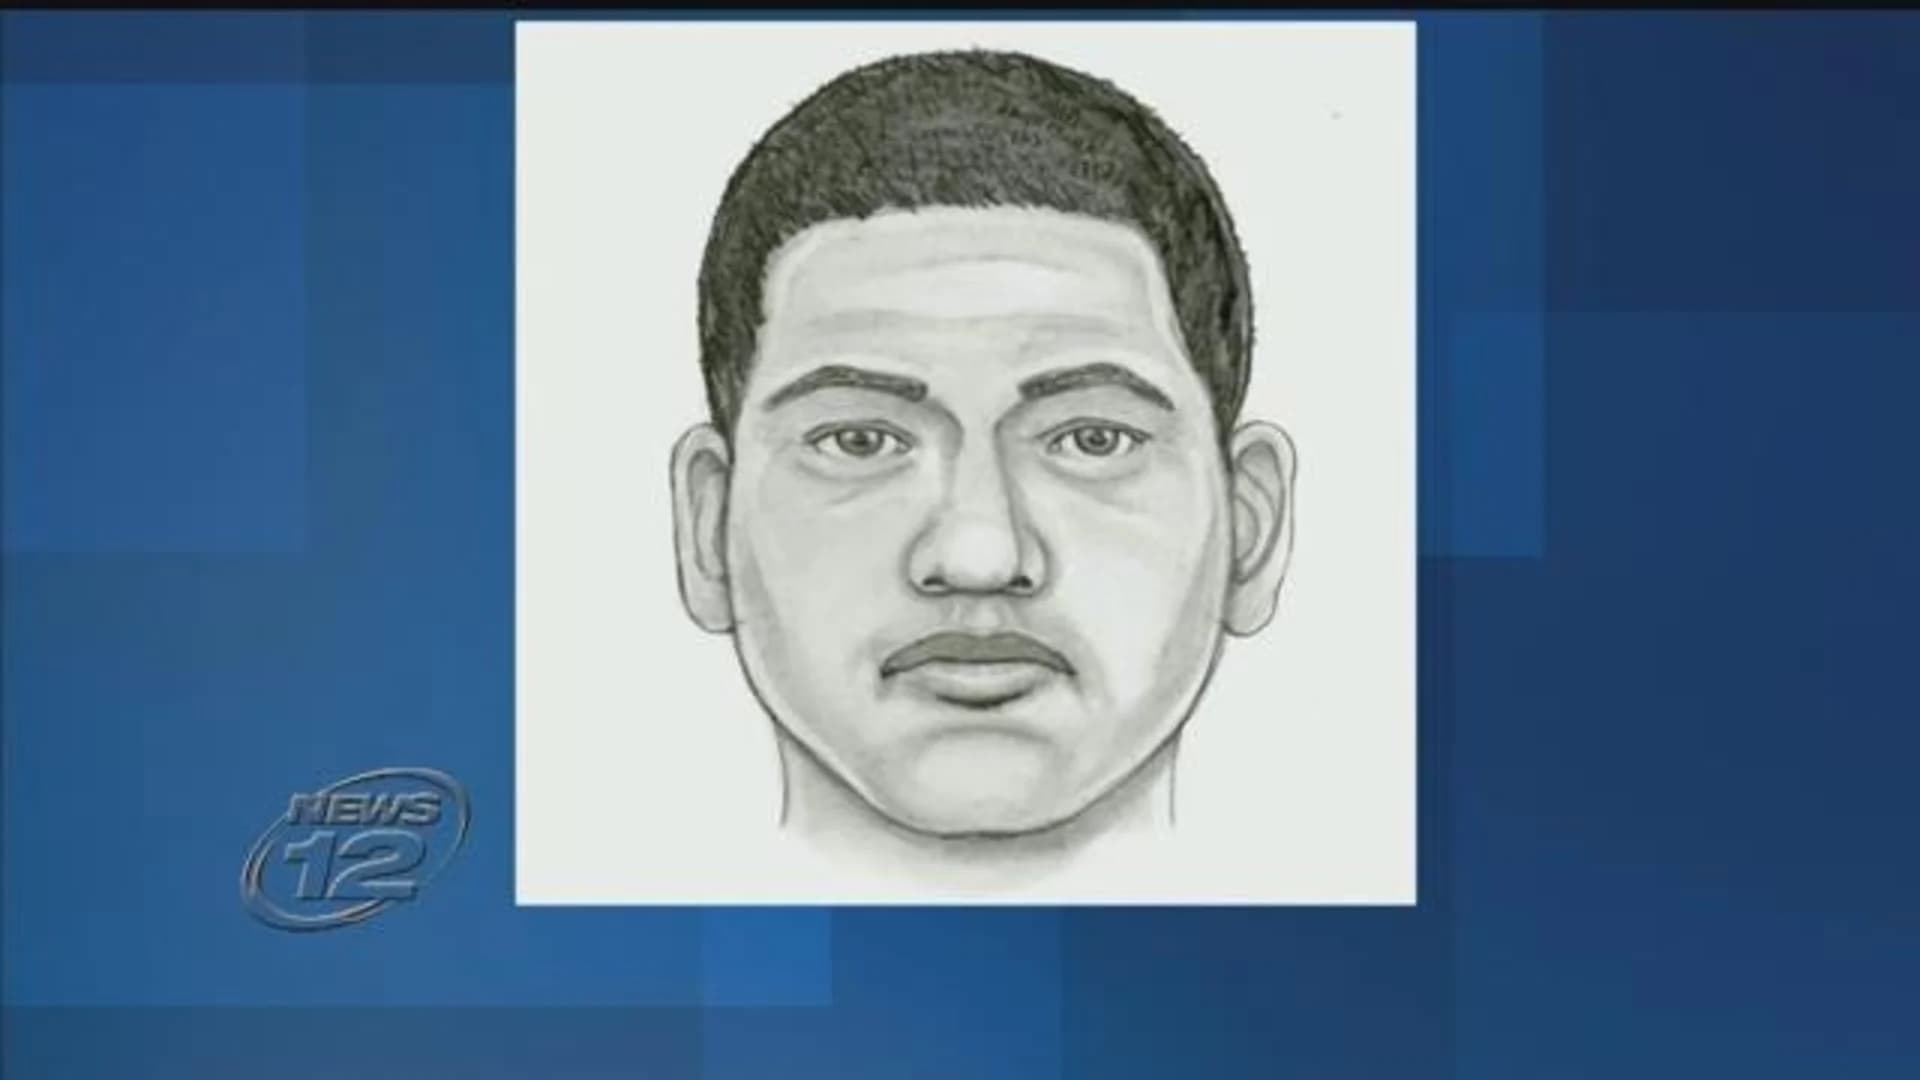 Man sought for attempting to lure teen girl in Uniondale